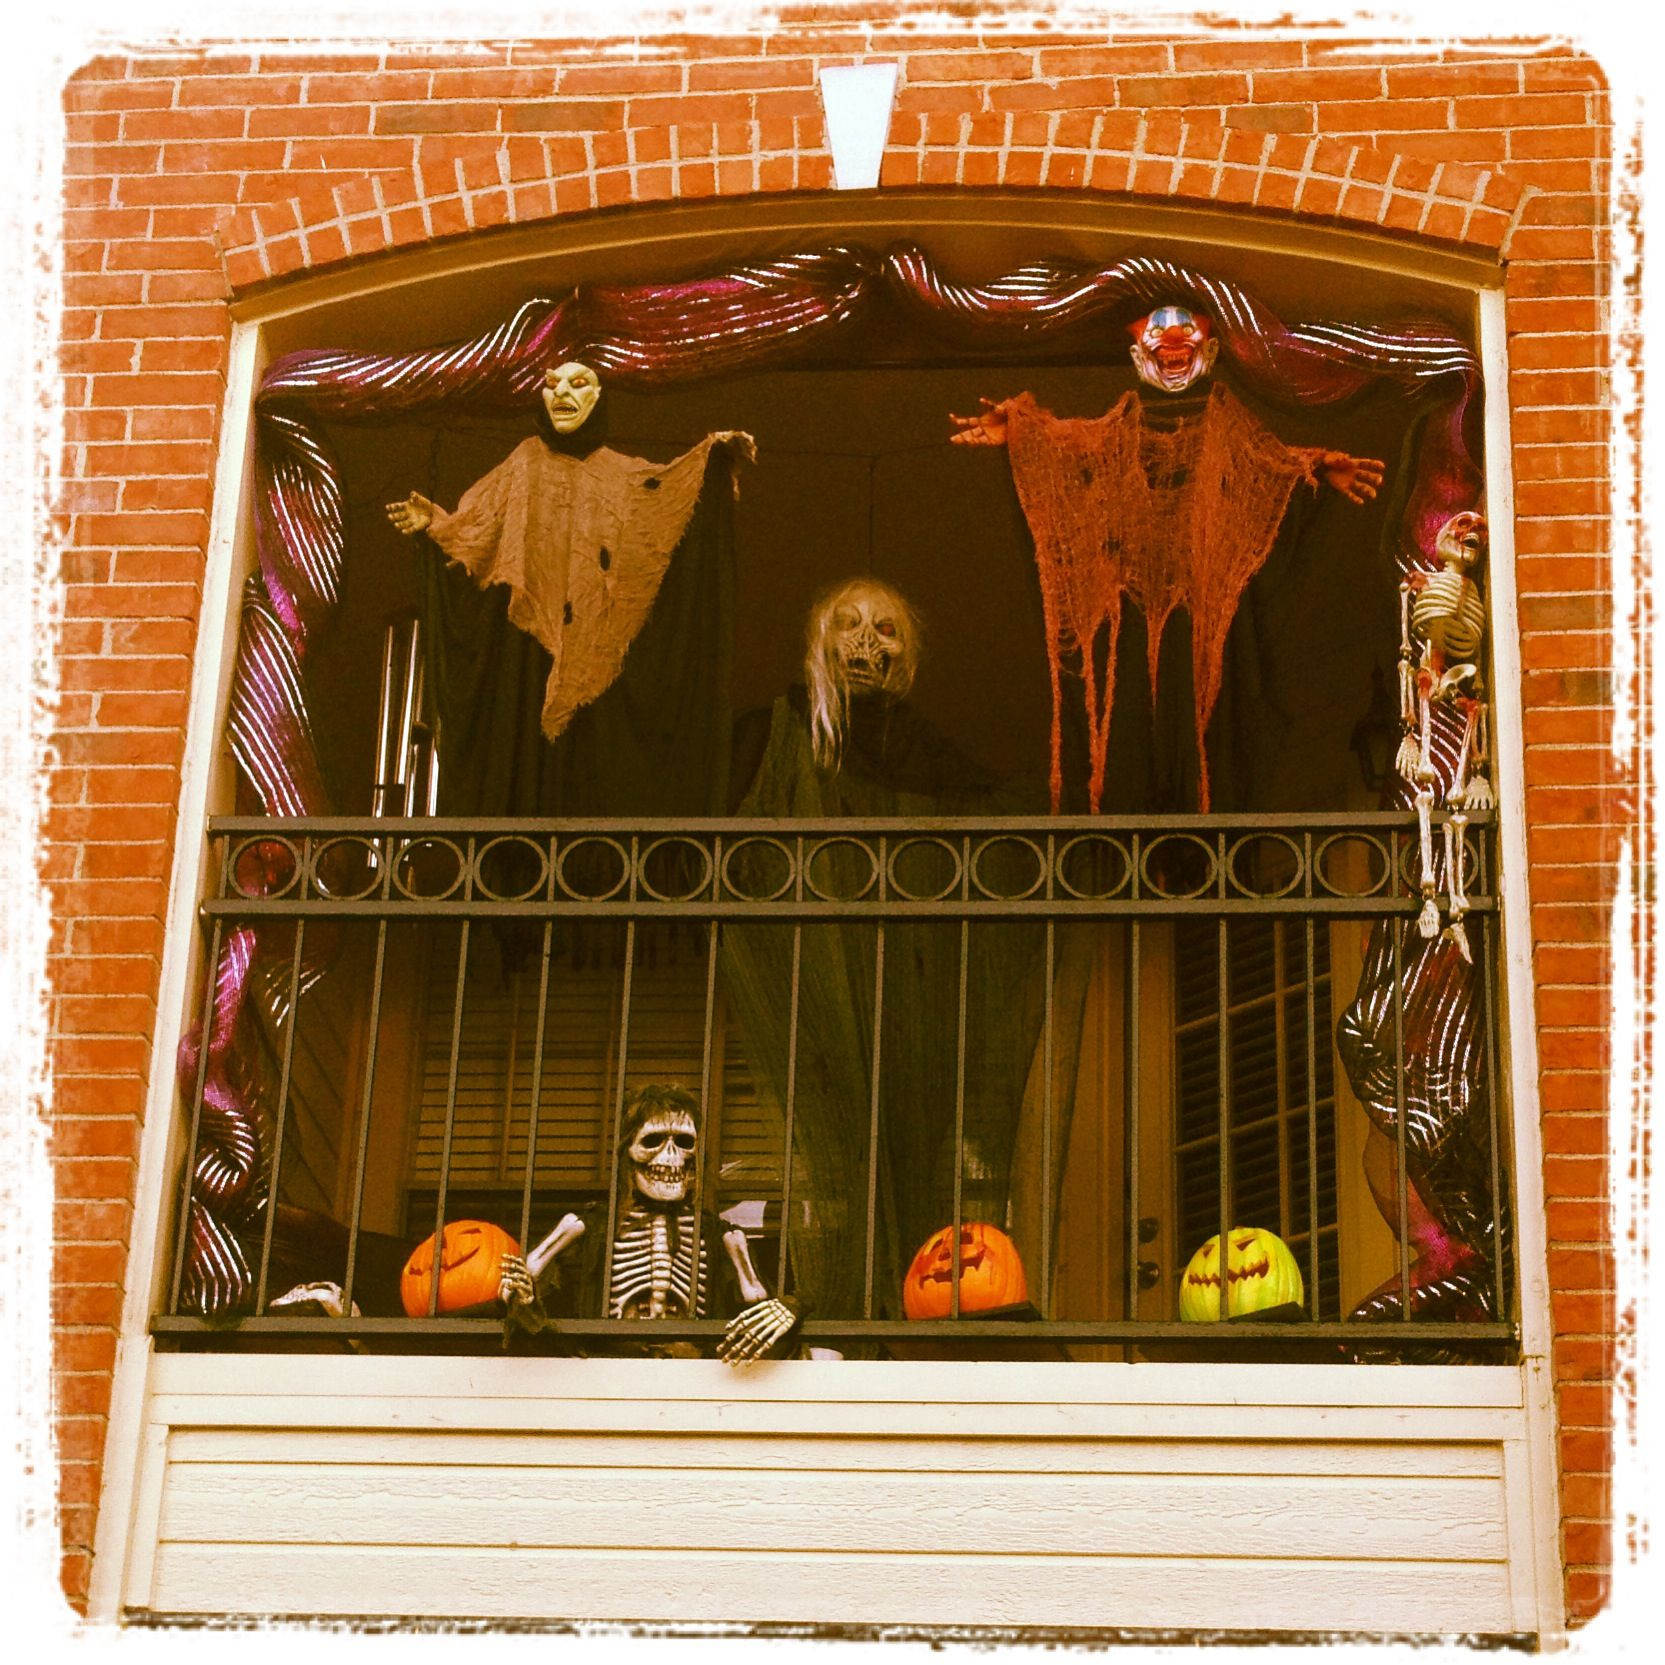 Apartment Balcony Halloween Decorations
 Halloween time on the balcony With images